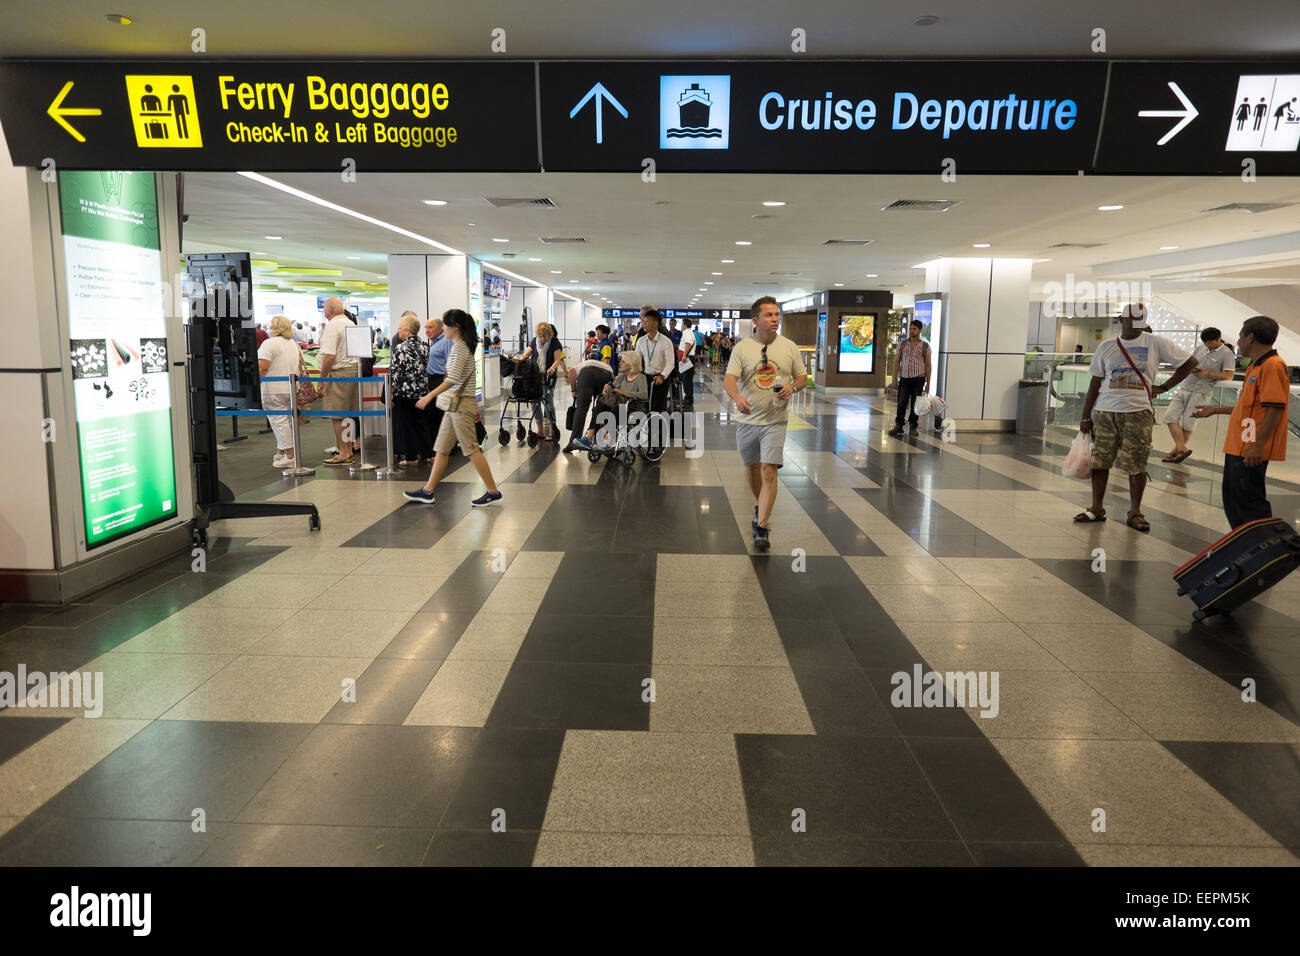 DFS (Departure Hall) - Singapore Cruise Centre (ferry & cruise)